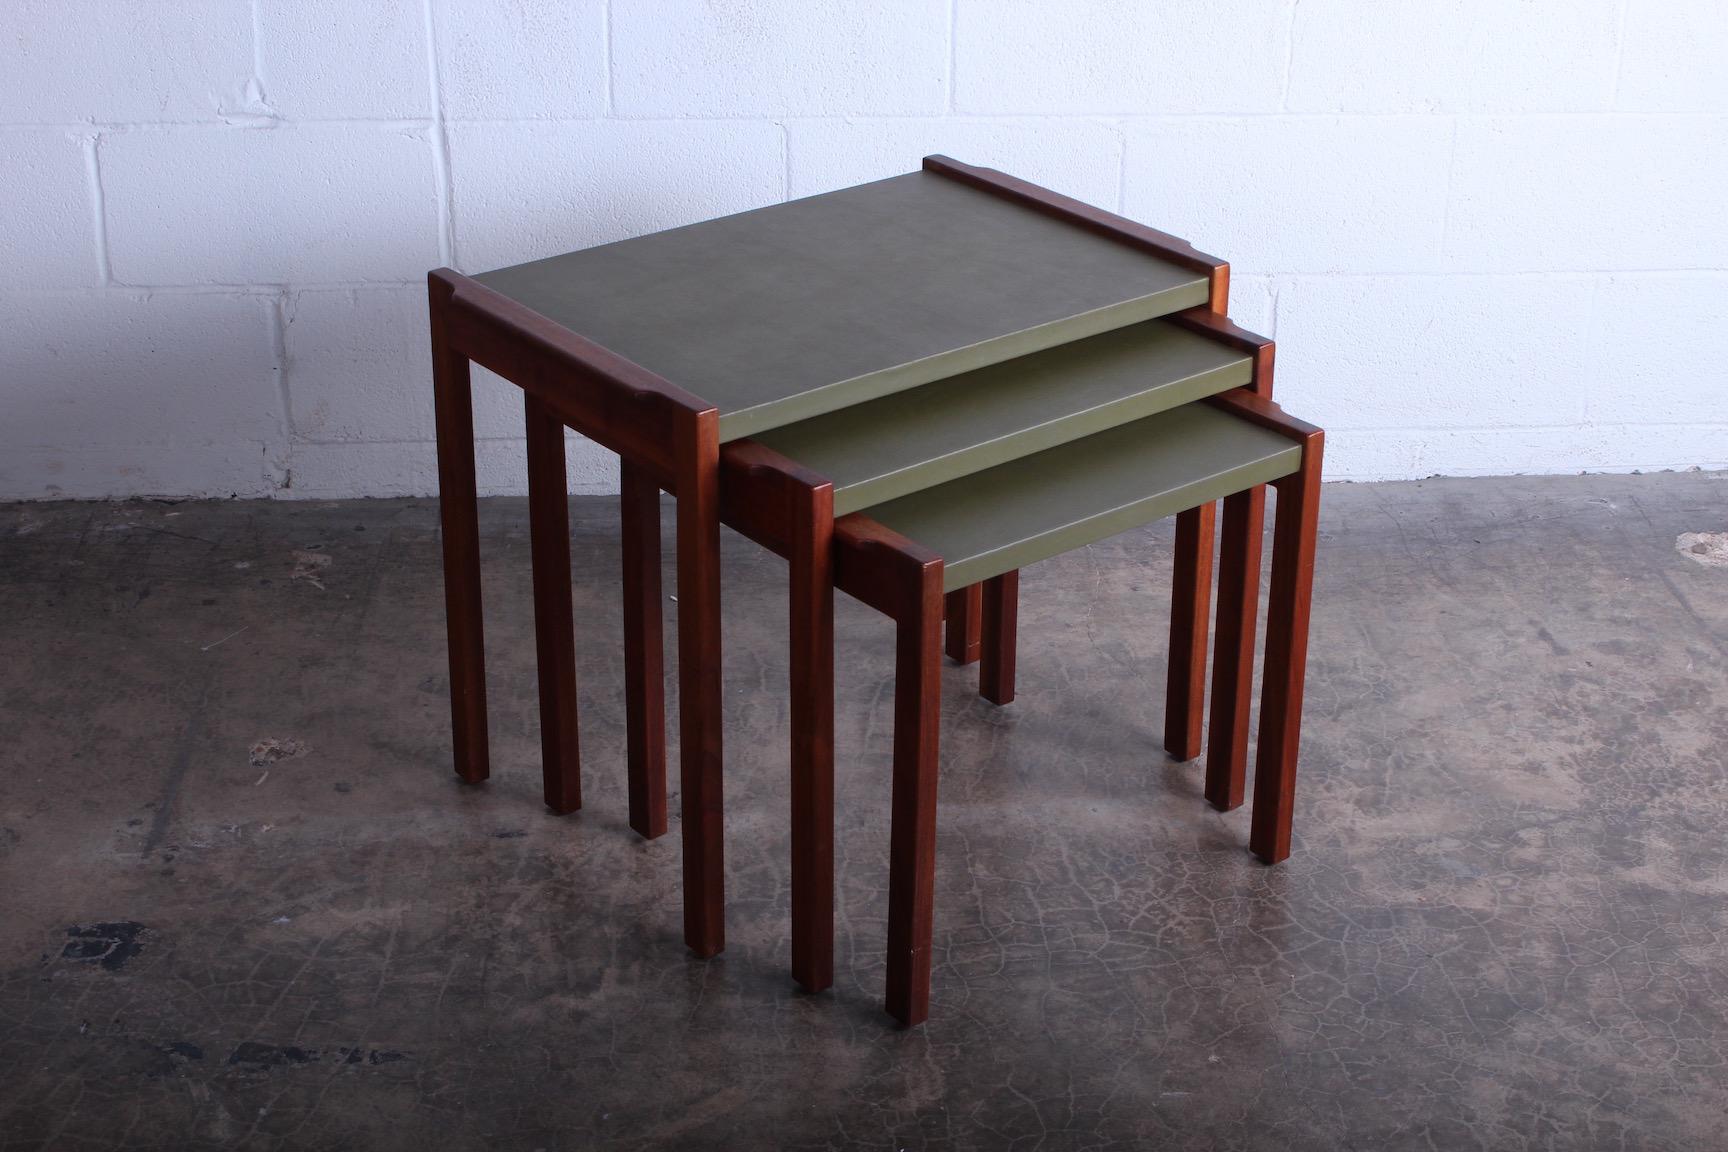 A set of three walnut nesting tables with green vinyl tops. Designed by Jens Risom.